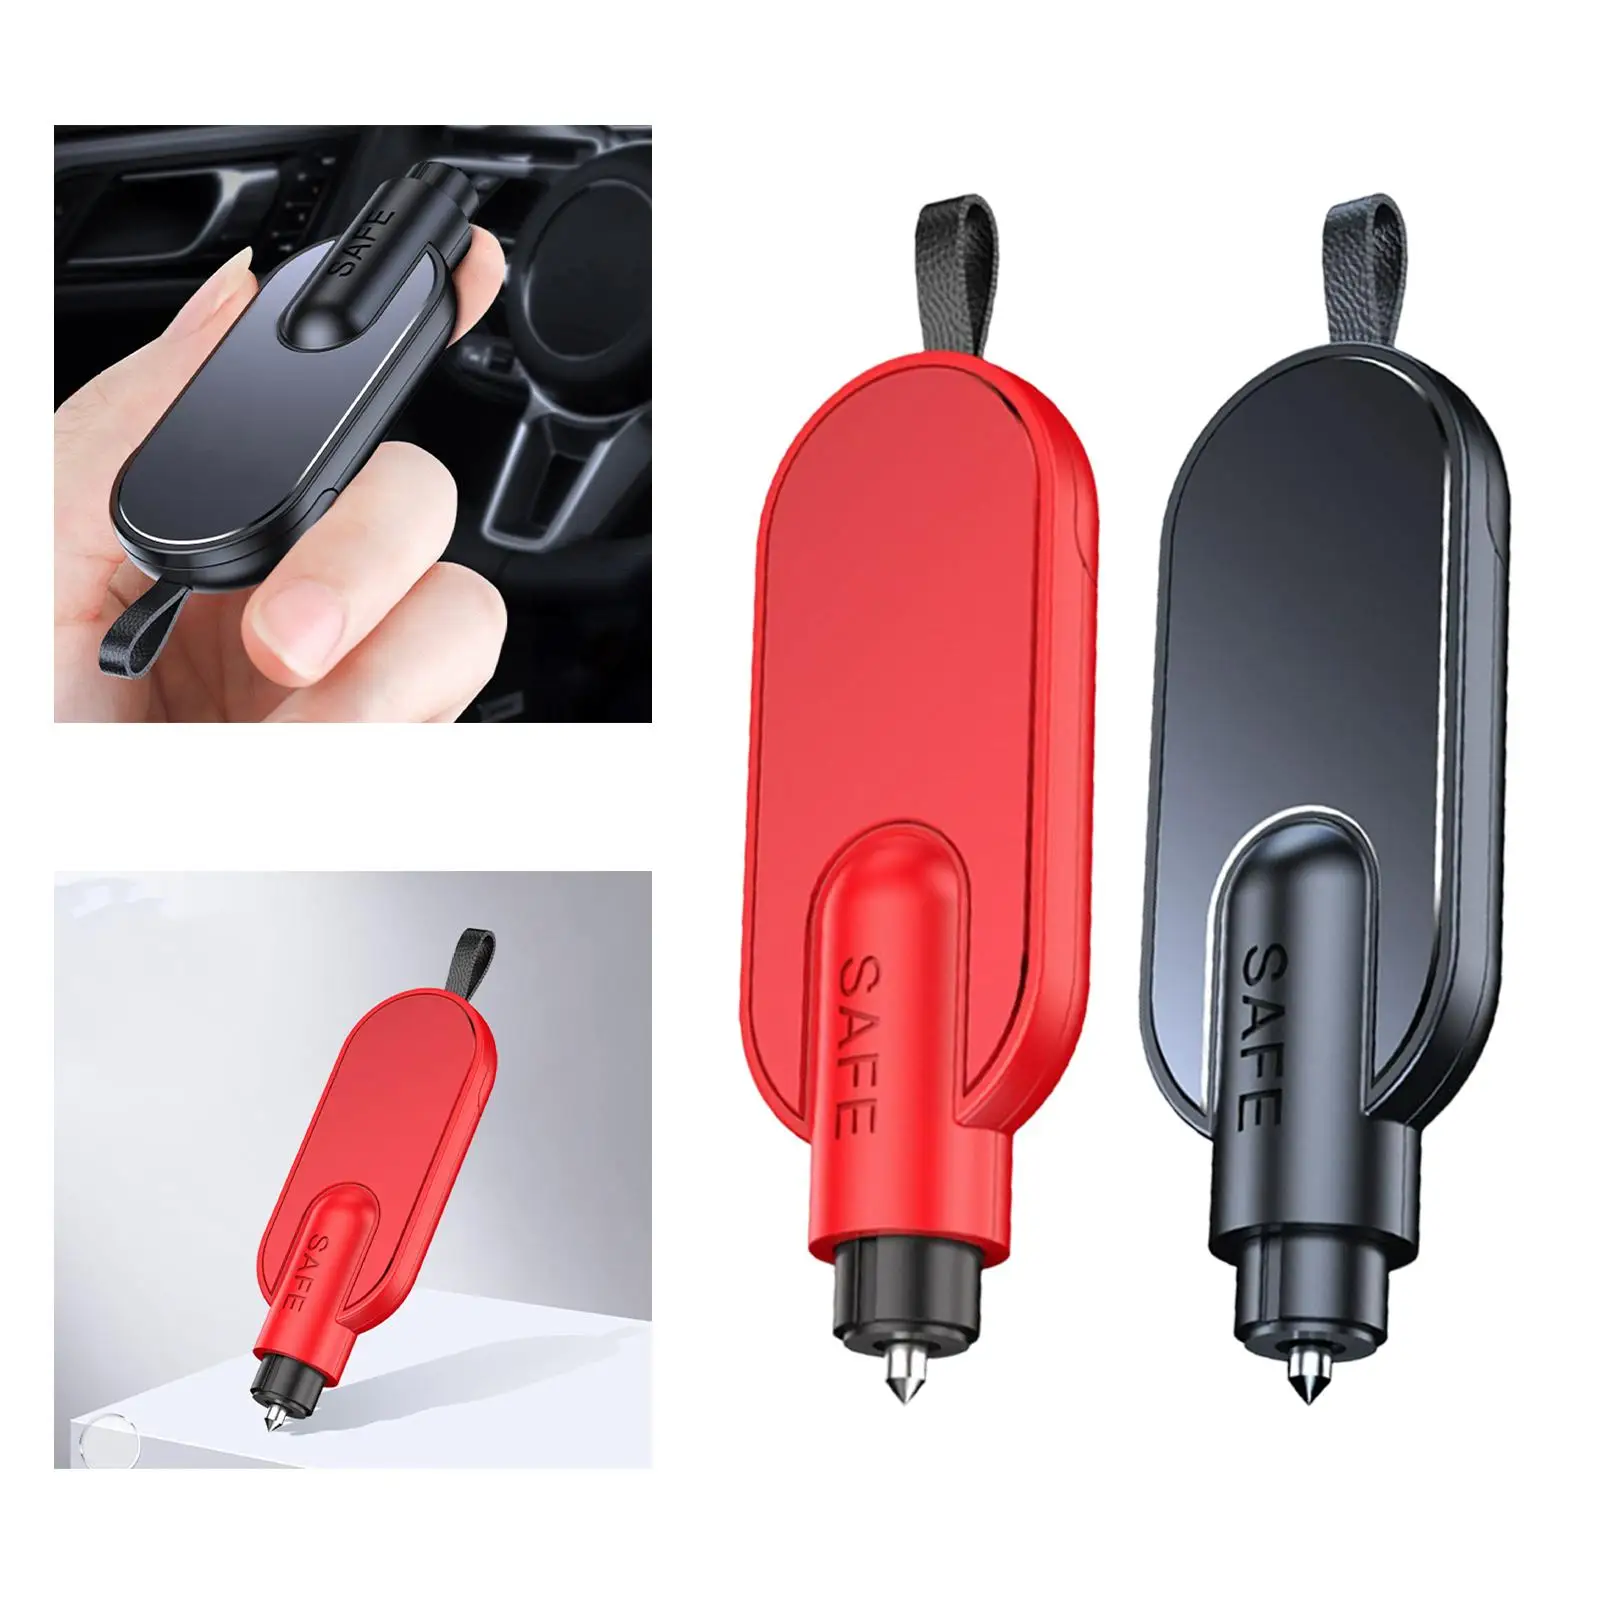 Car Window Breaker belt Cutter Reusable Rescue Tool with PU Leather Lanyard Escape for Vehicle Automobiles SUV Trucks